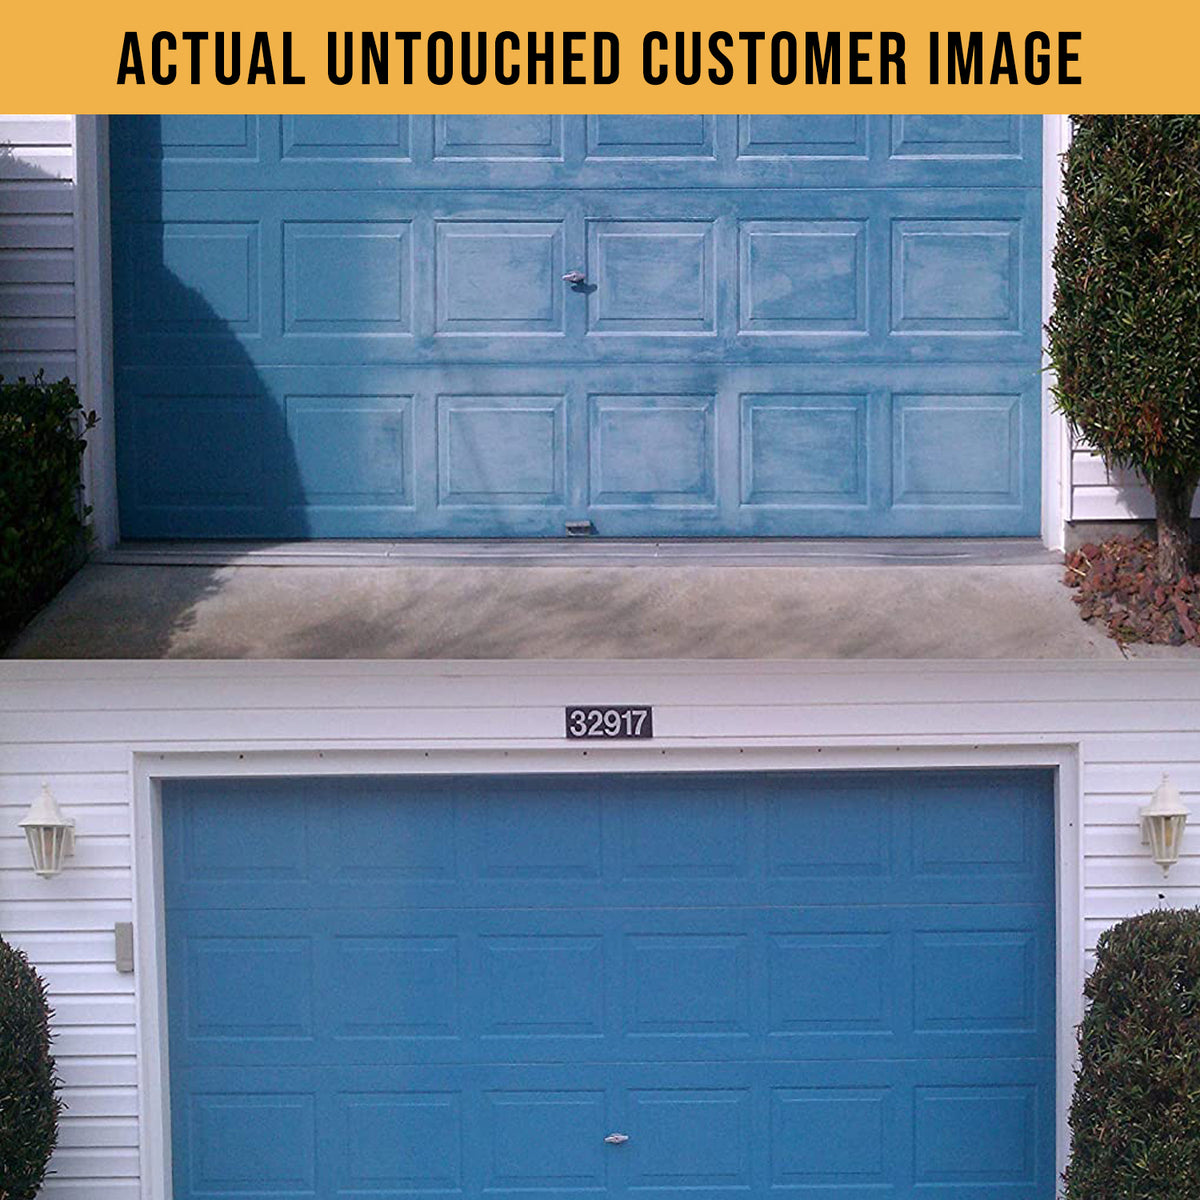 Infographic Blue Faded Oxidized Metal Garage Doors Before And After Restored With Vinyl Renu Vinyl Siding Restorer Top Faded Bottom Original Color Restored